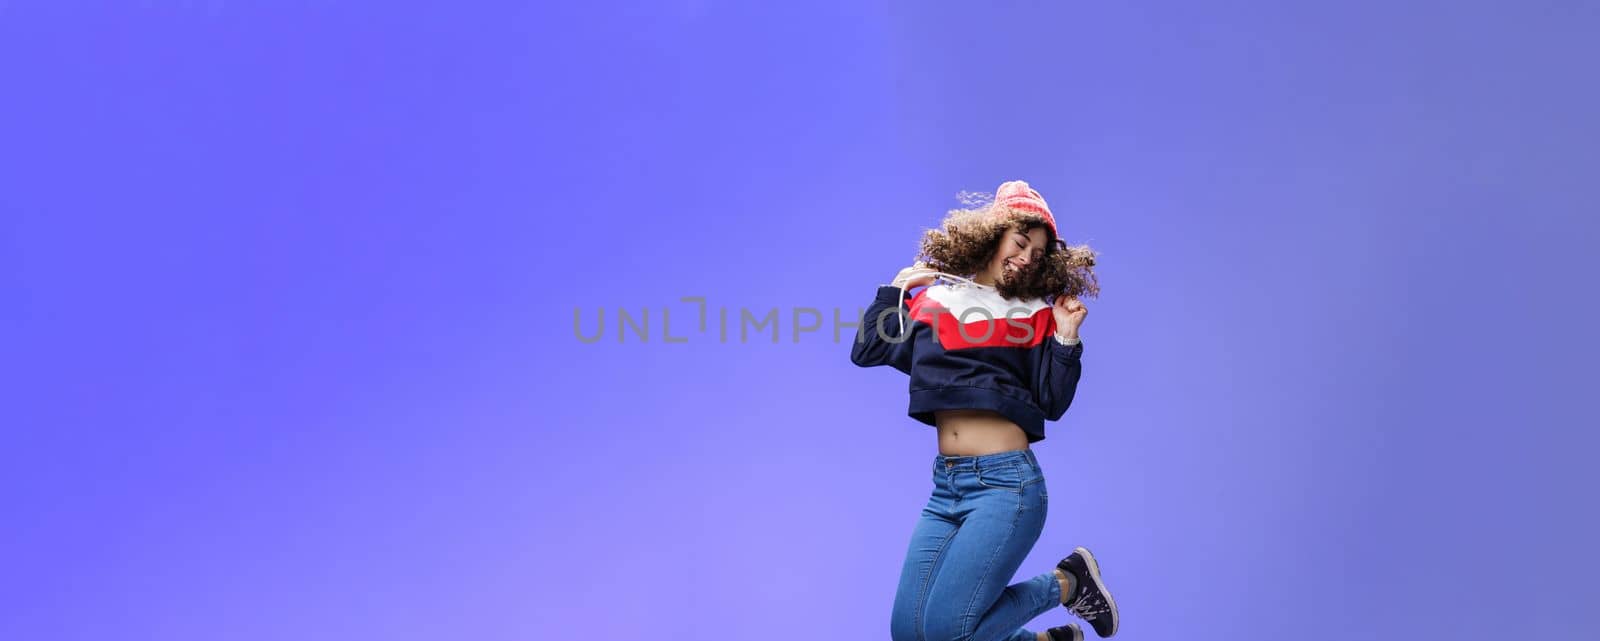 Girl jumping from happiness and delight feeling carefree close eyes and smiling broadly enjoying moment having fun raising hands being dreamy and playful over blue background. Lifestyle, fashion and positive emotions concept